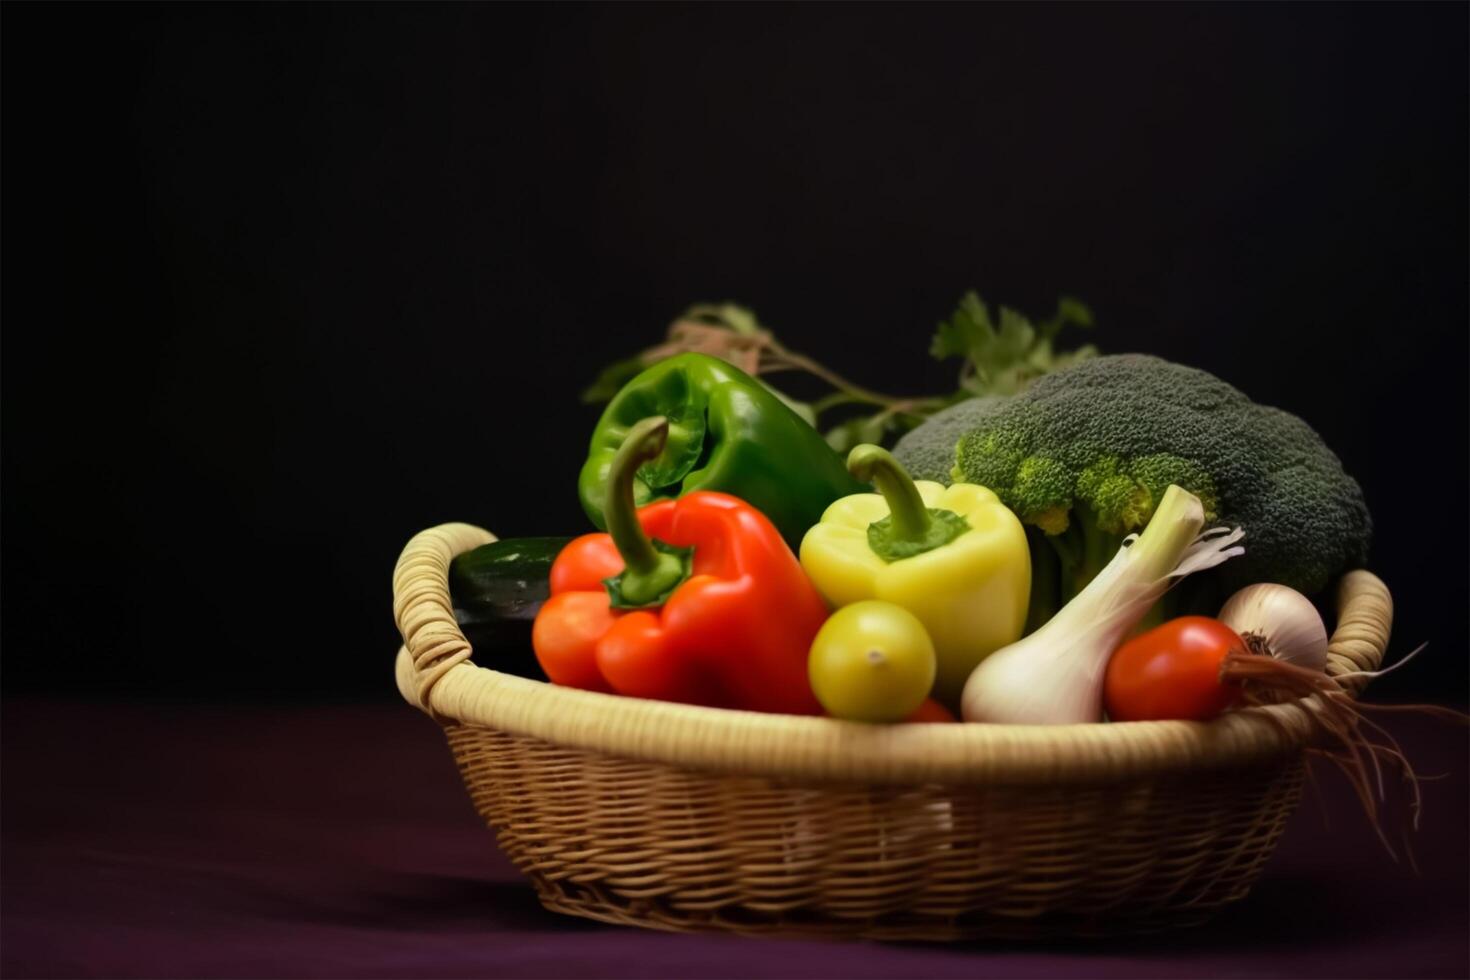 Fresh vegetables in basket textured background, natural theme, health care concept. photo